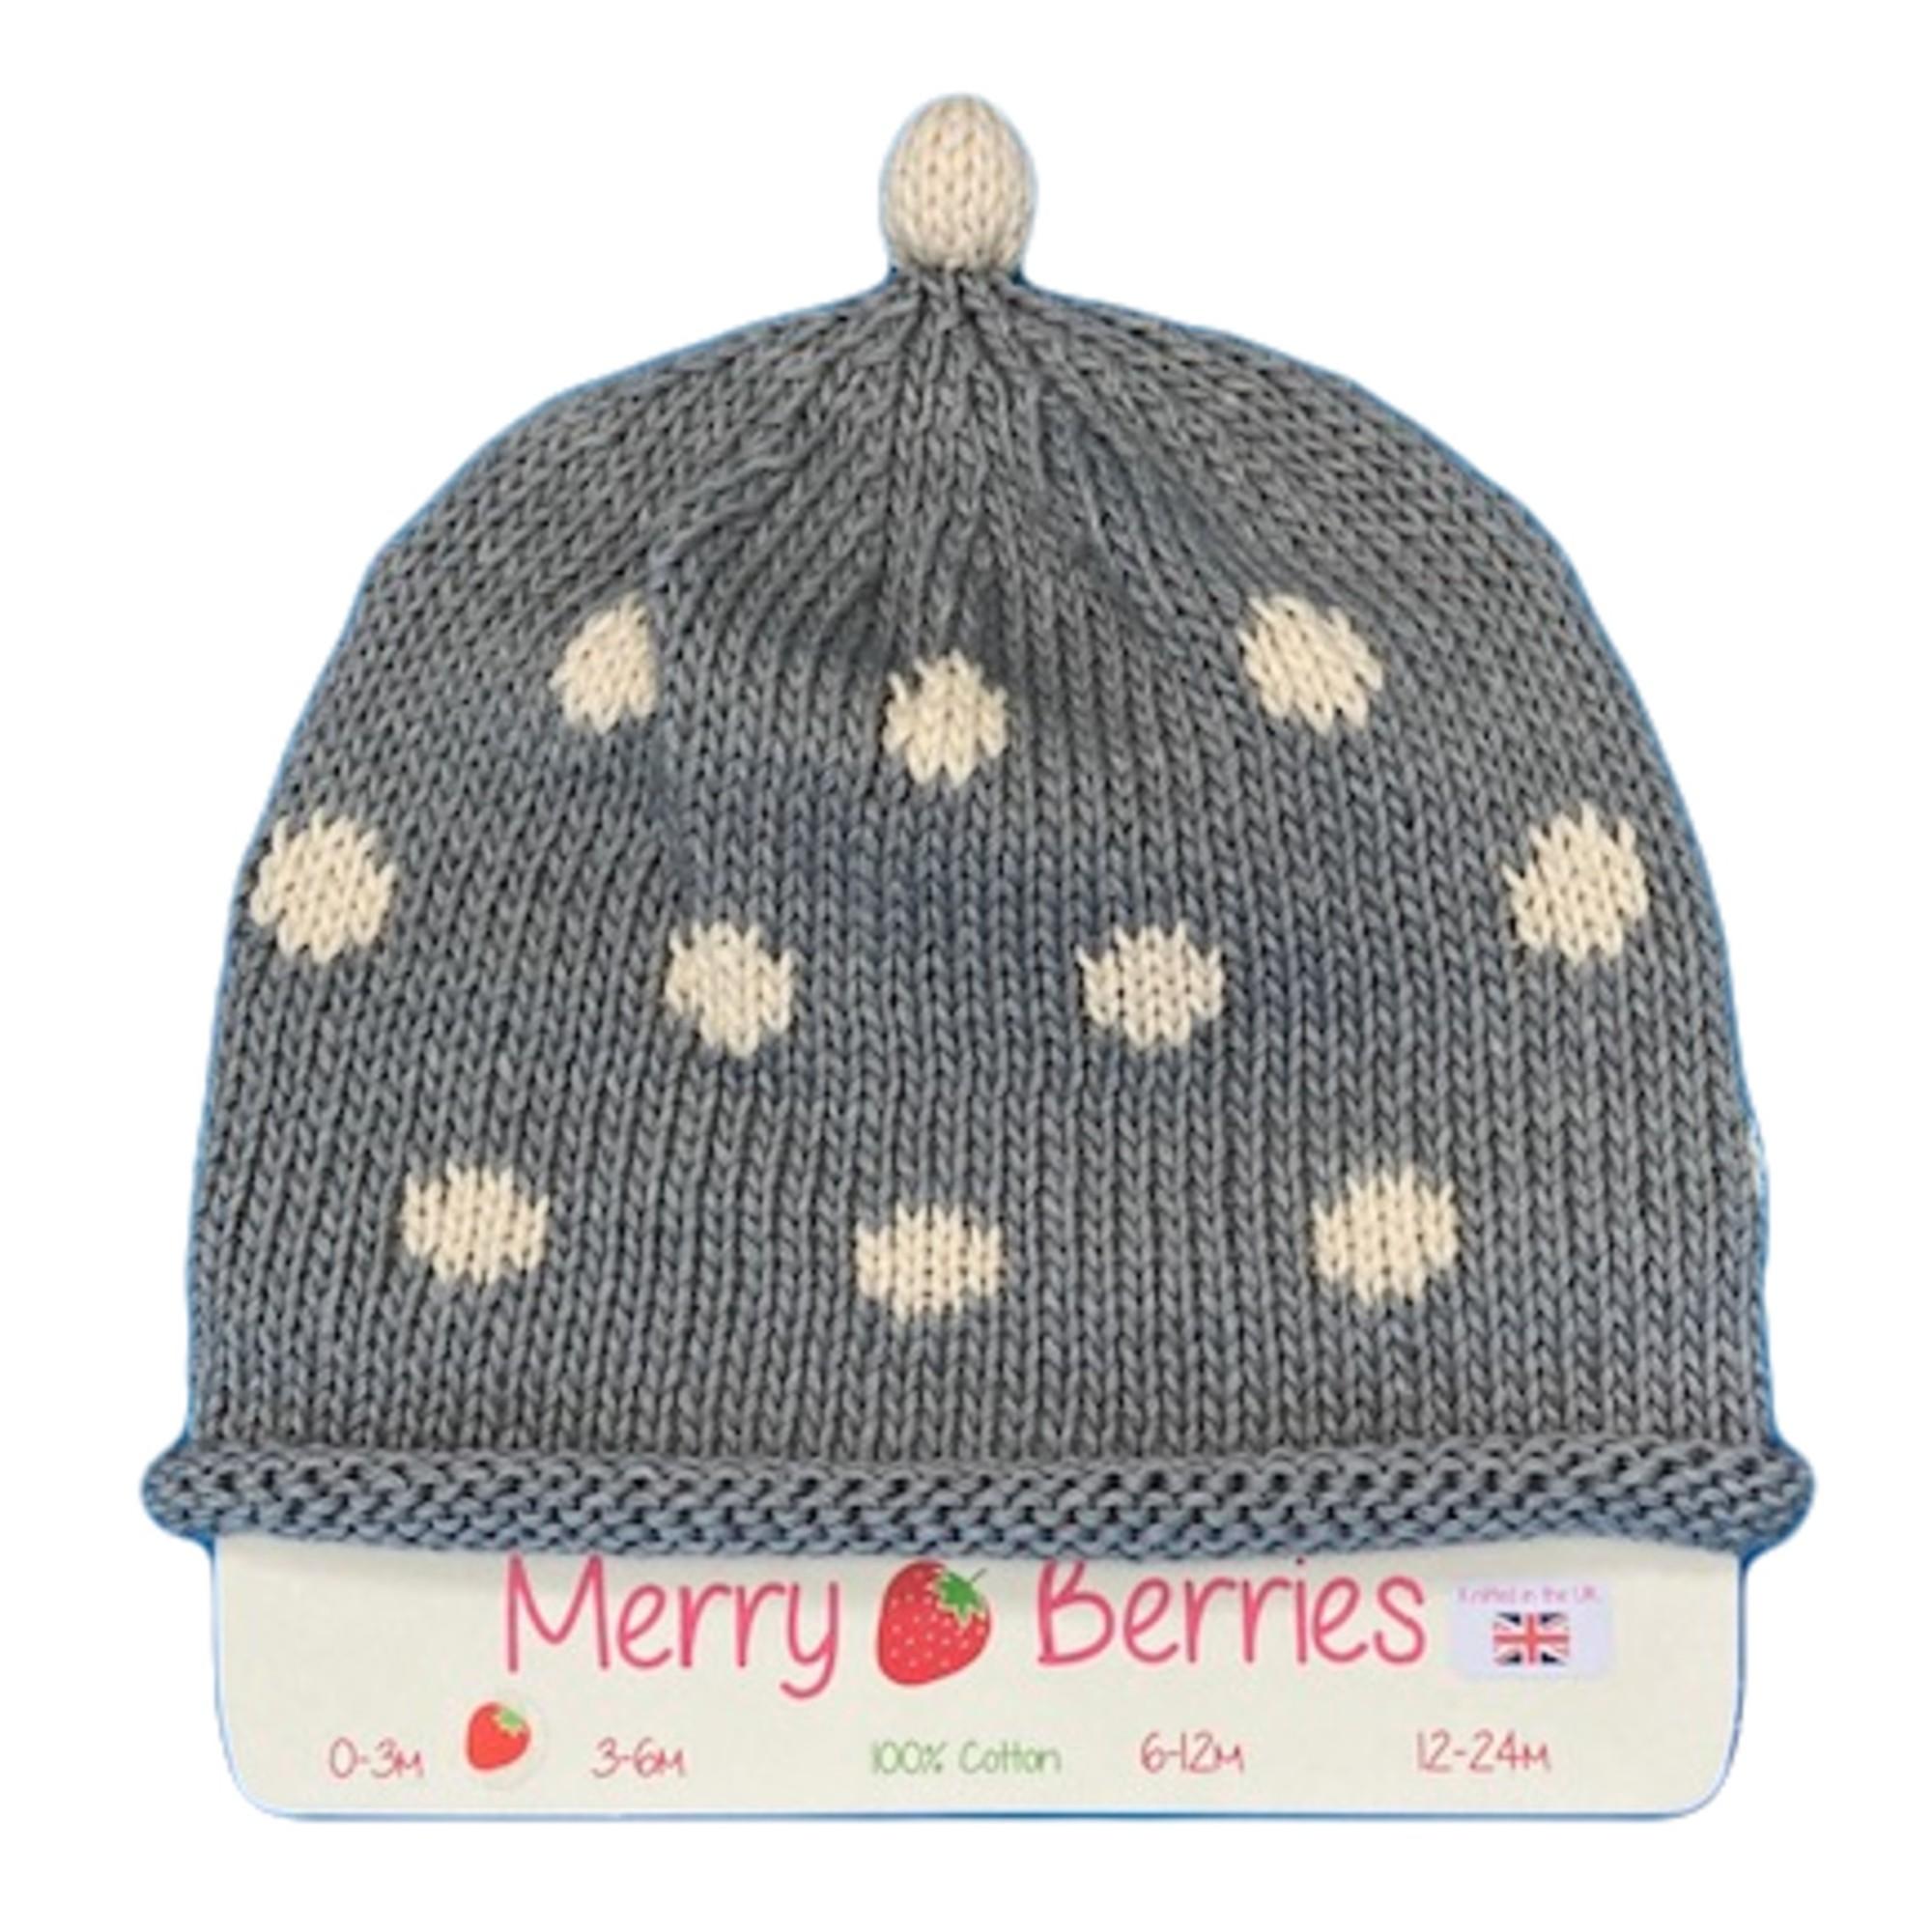 Merry Berries - Grey Spot Knitted baby Hat-0-24mths-Cotton